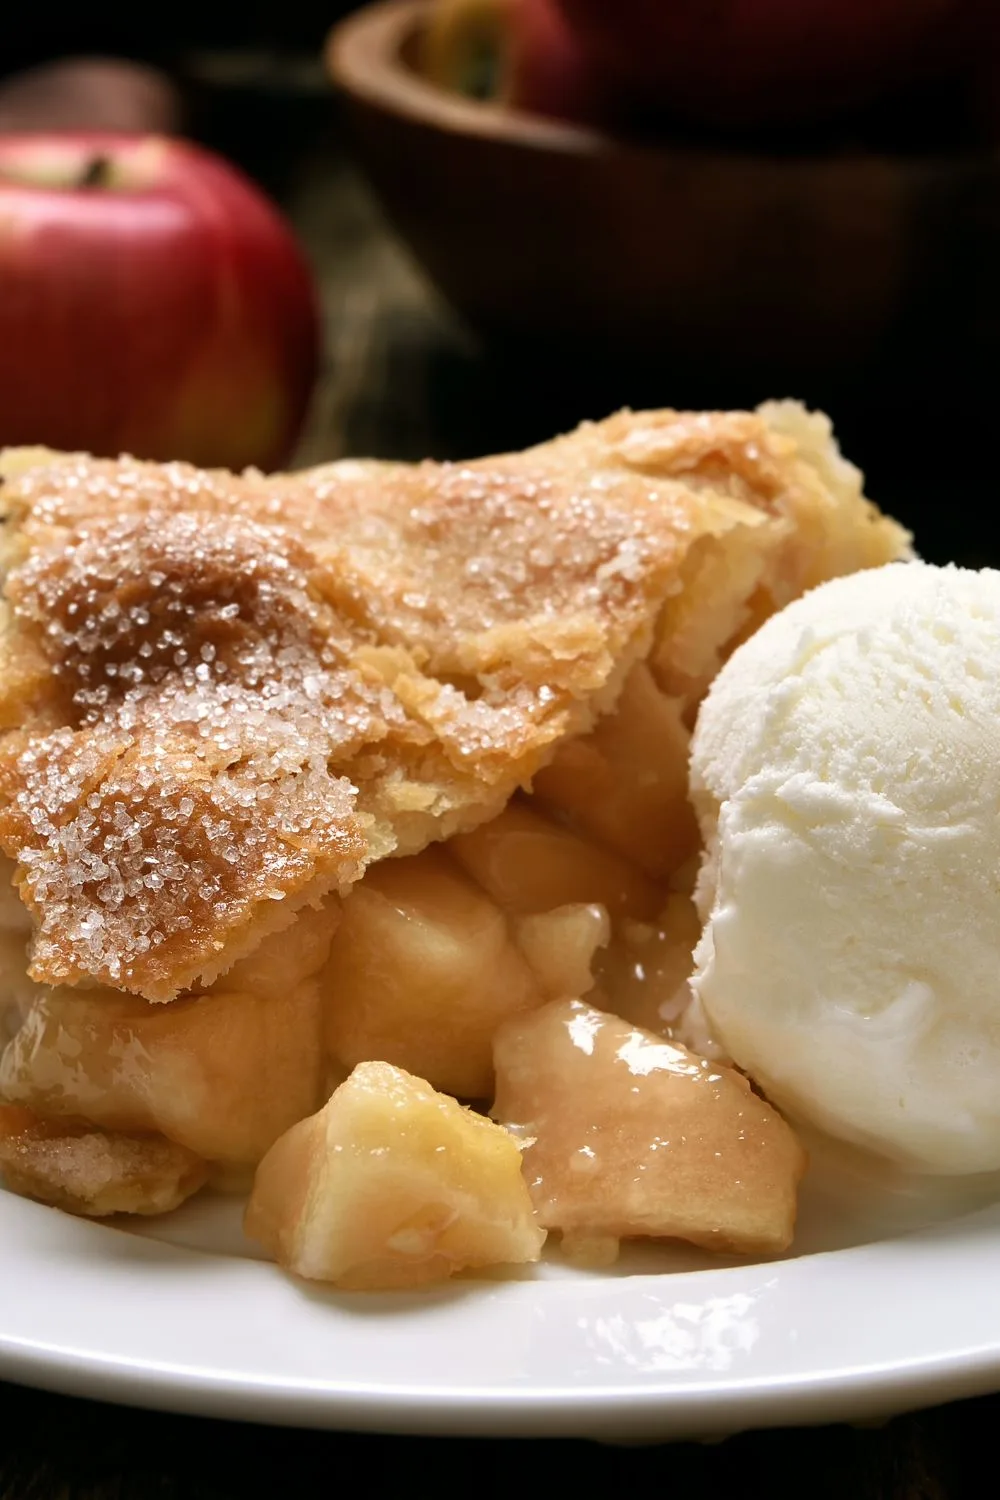 a slice of apple pie next to a scoop of ice cream